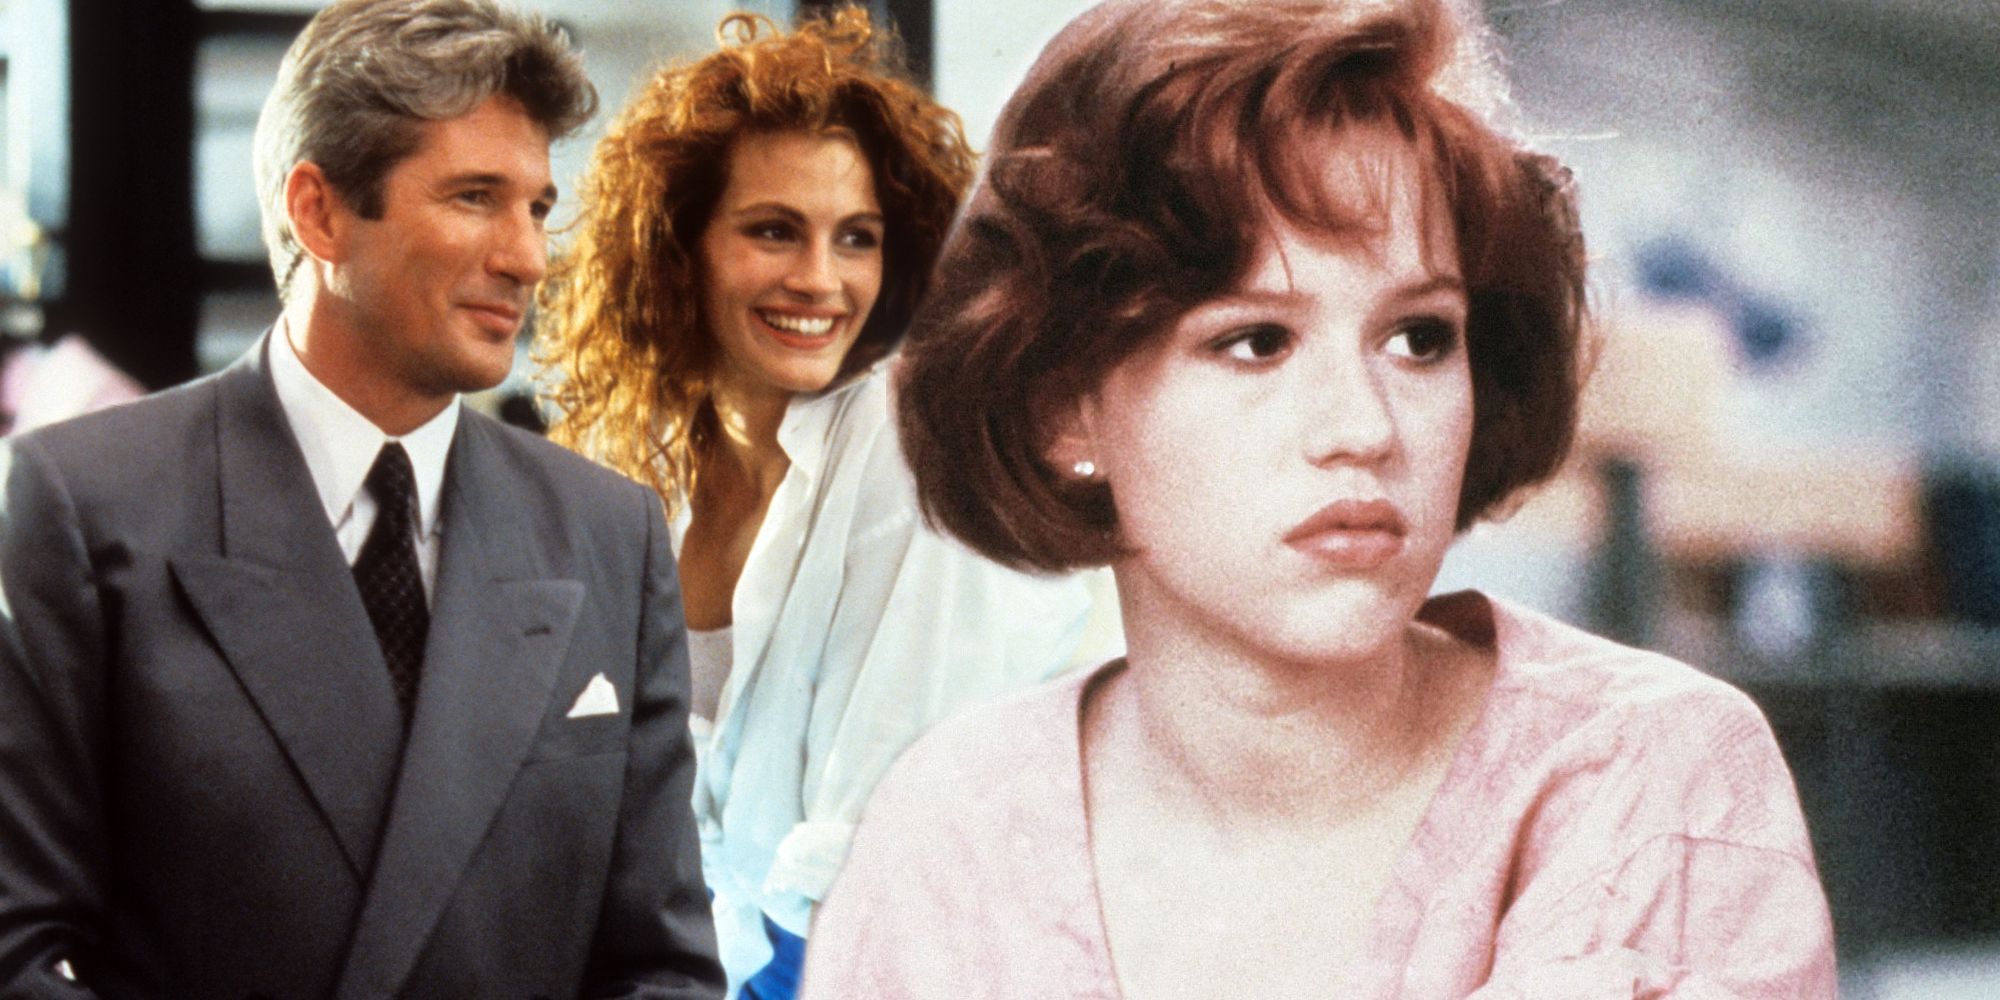 Blended image of Vivian Ward and Edward together in Pretty Woman with a sad Molly Ringwald in The Breakfast Club